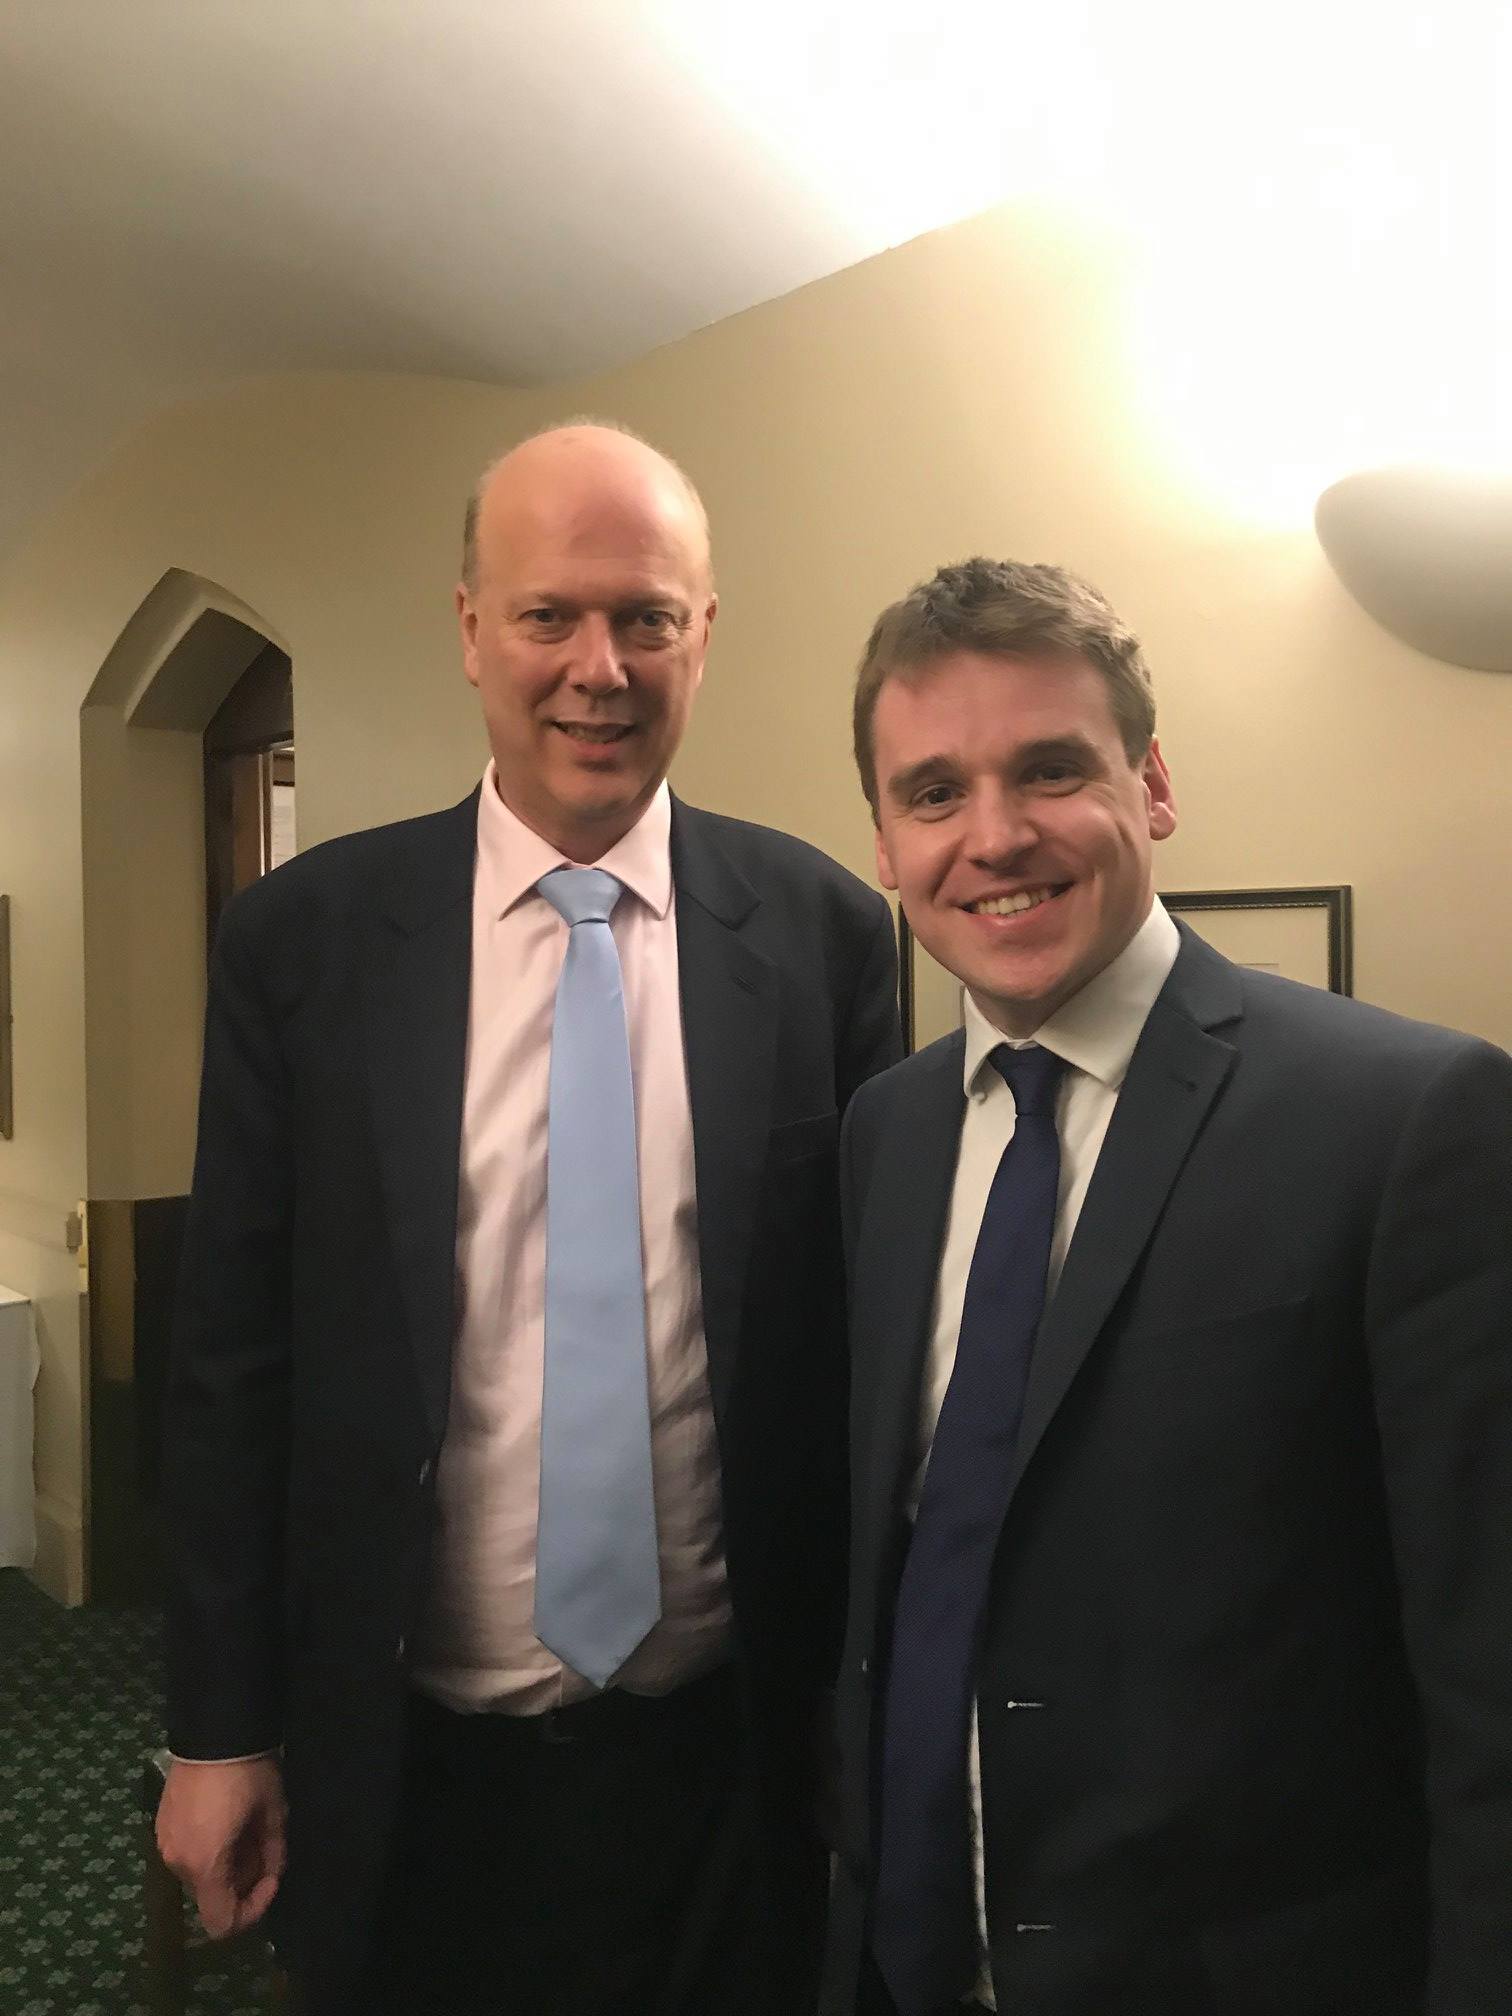 I was glad to be able to have a brief conversation with the Secretary of State for Transport earlier this week in Parliament about some of the transport priorities facing Ipswich.